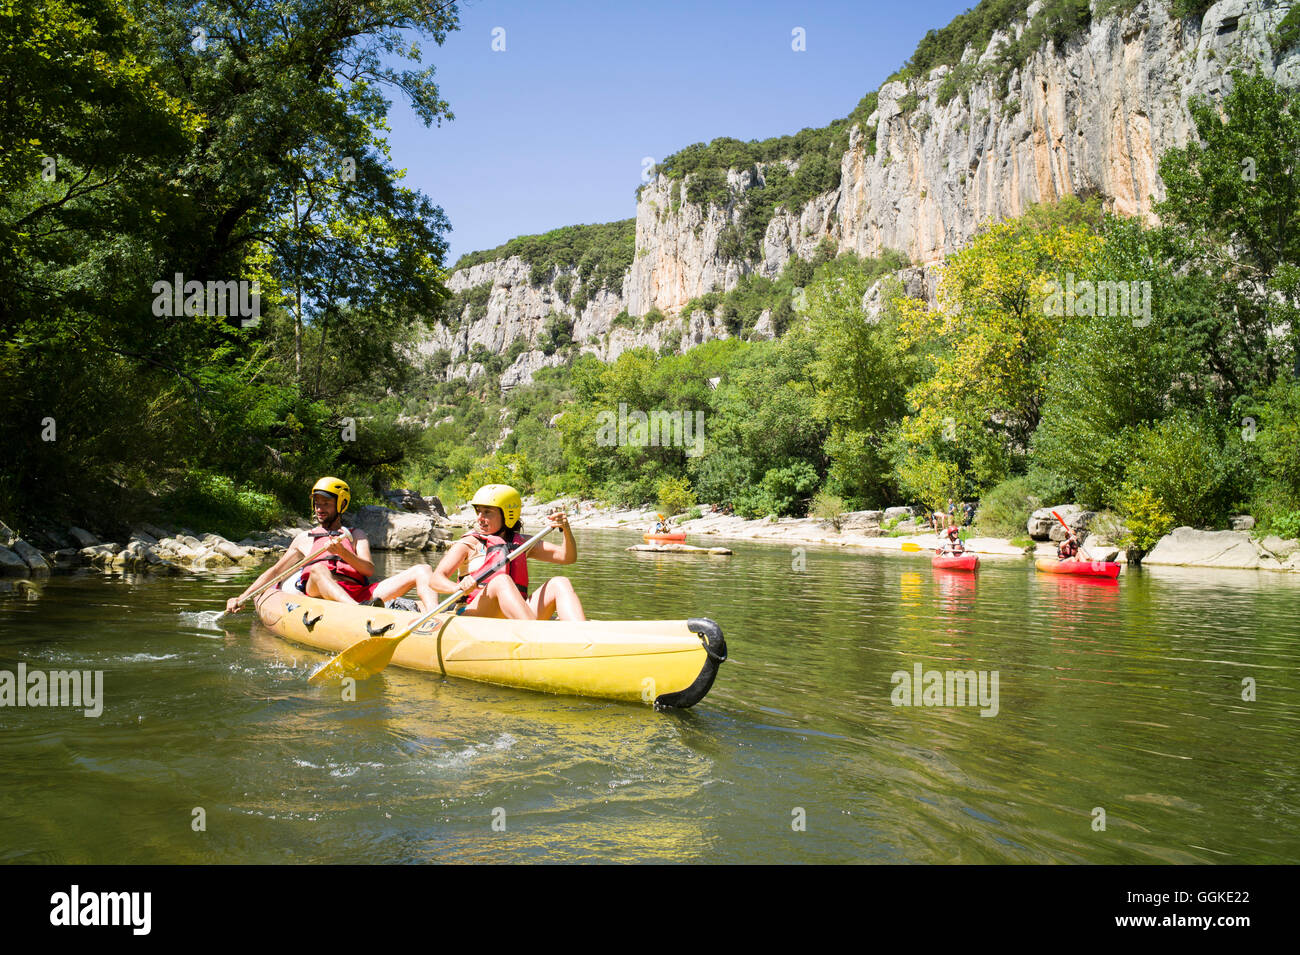 Canoing on river Herault, Herault gorge, Saint-Bauzille-de-Putois, Ganges,  Herault, Languedoc-Roussillon, France Stock Photo - Alamy